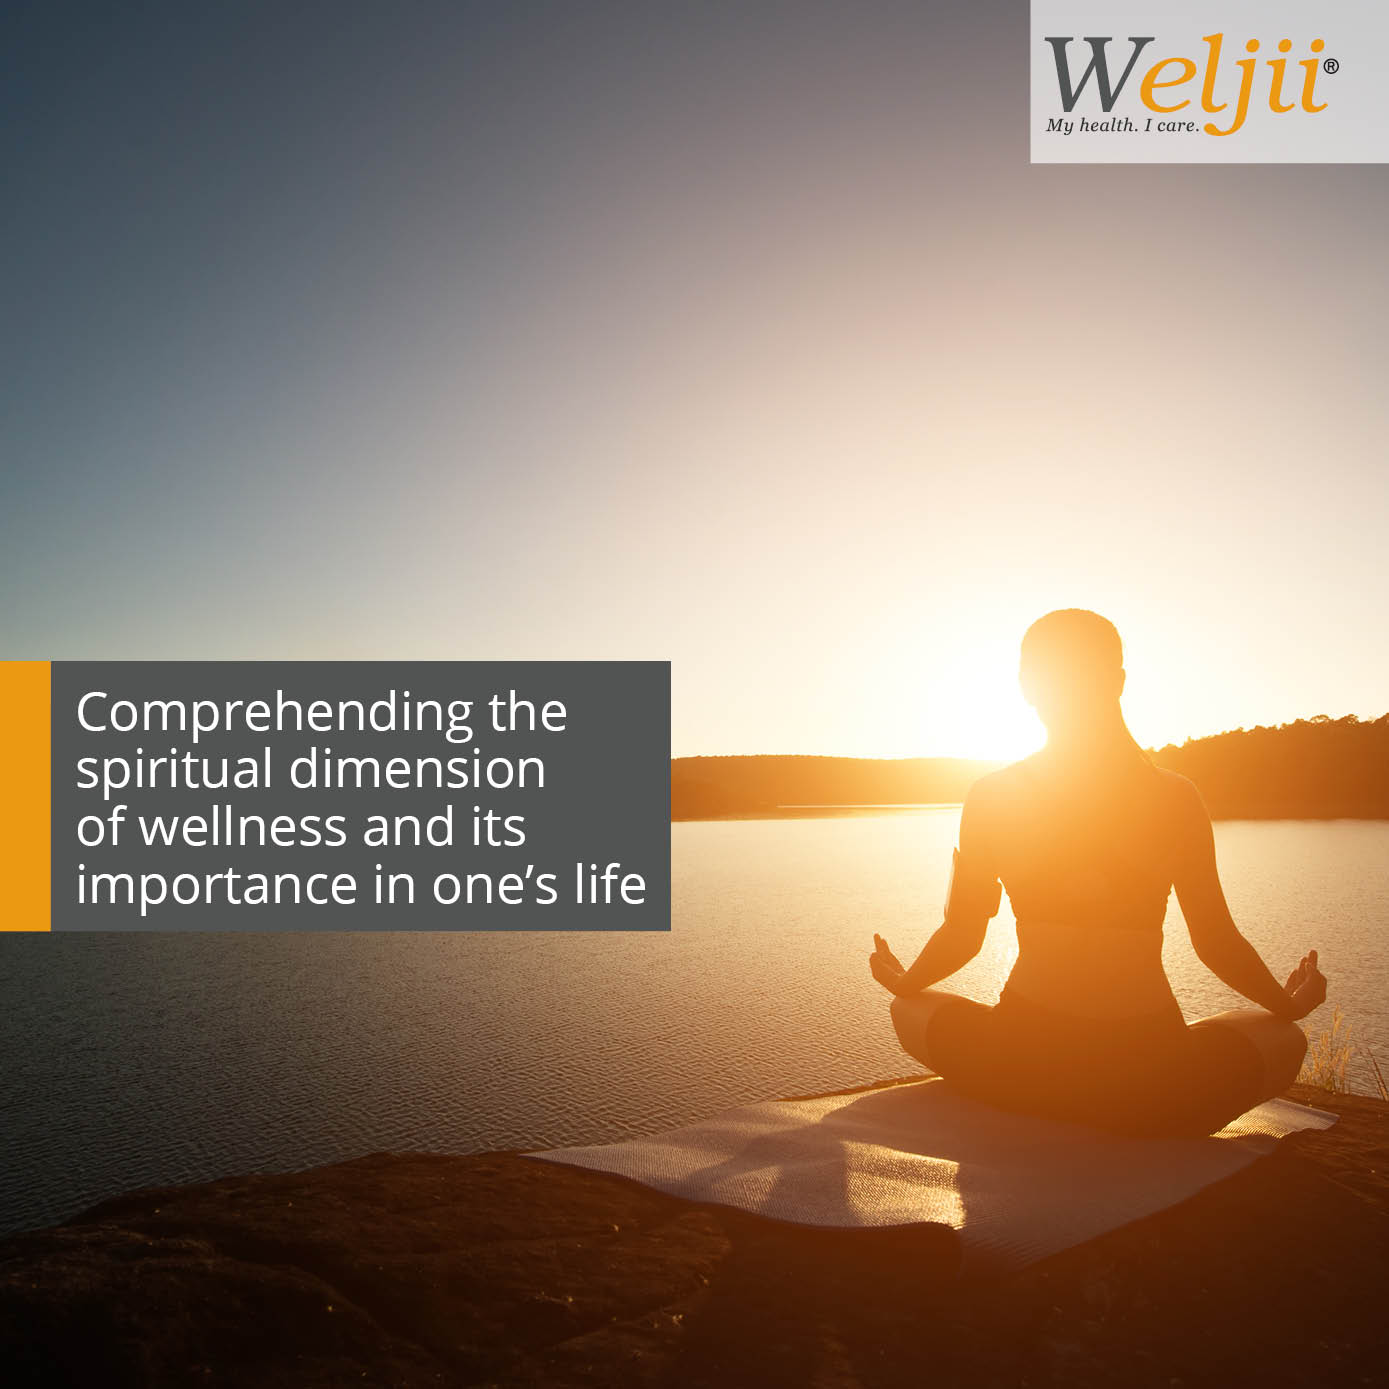 spiritual dimension of wellness and its importance in one's life